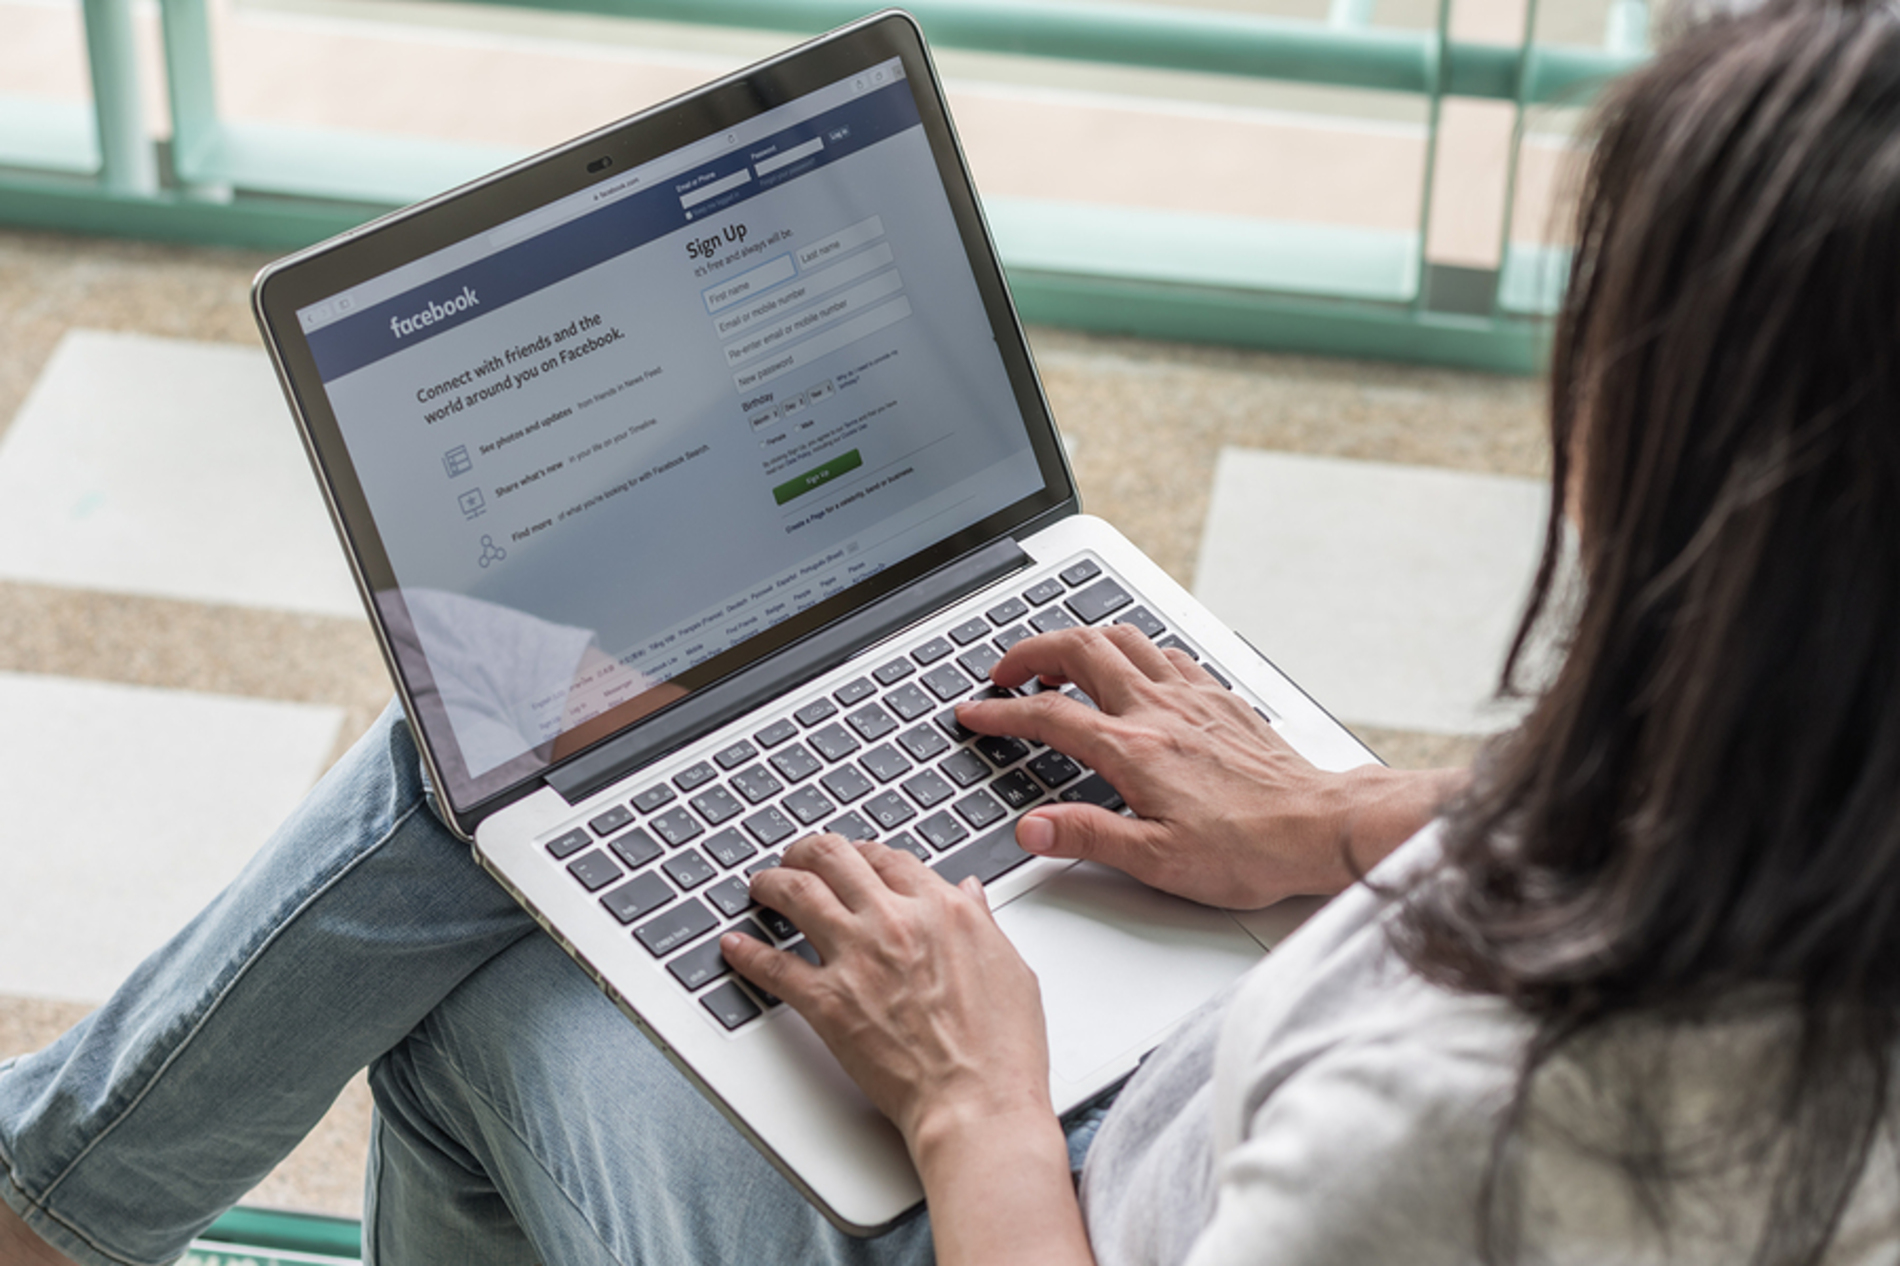 Woman accessing Facebook on her laptop computer.